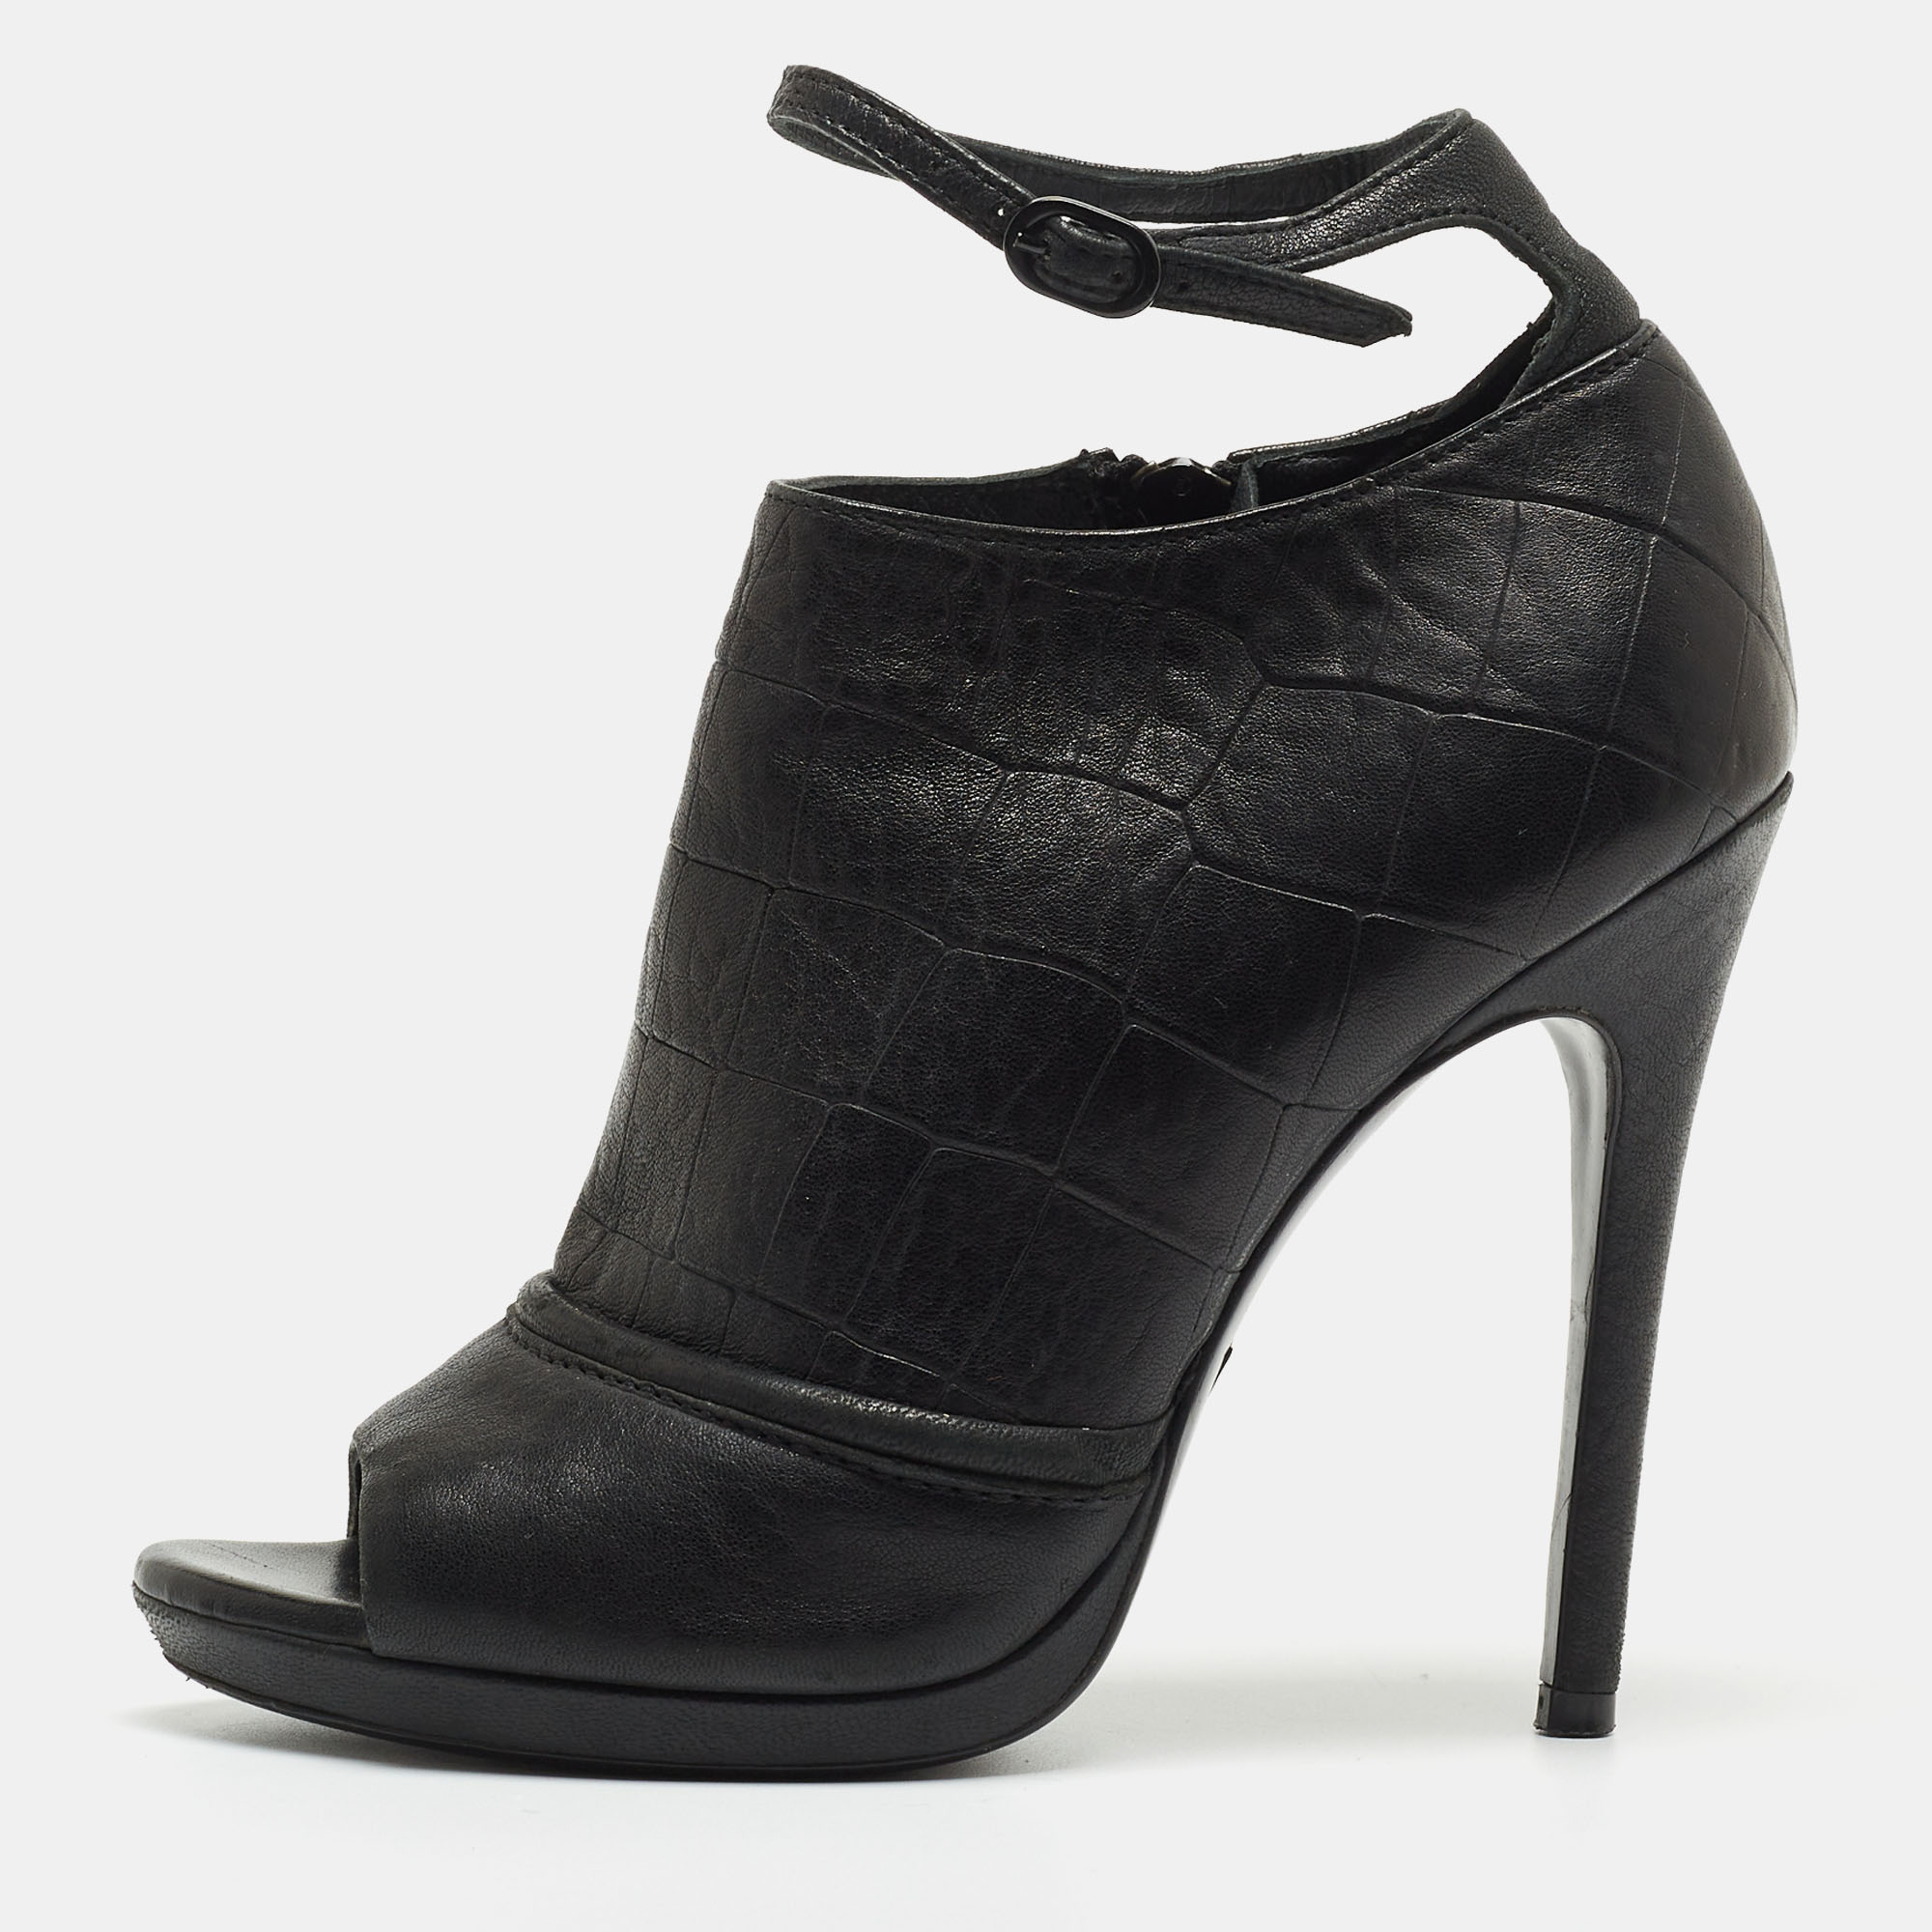 

McQ by Alexander McQueen Black Croc Embossed Leather Peep Toe Ankle Strap Booties Size